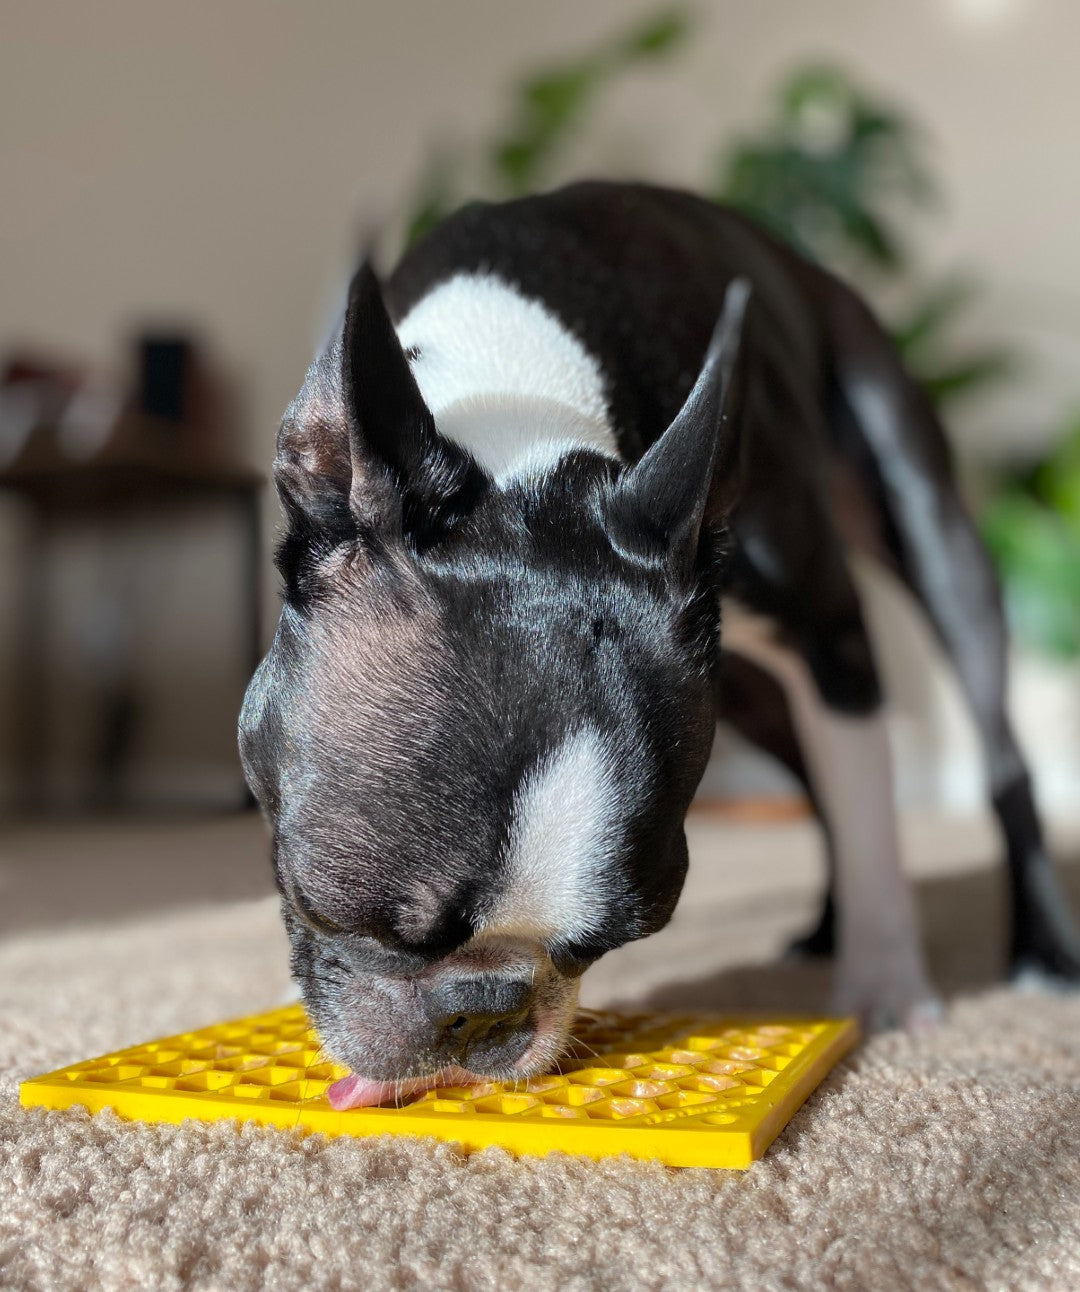 KONG Licks Mat Treat Dispenser with Ridges and Grooves, Small